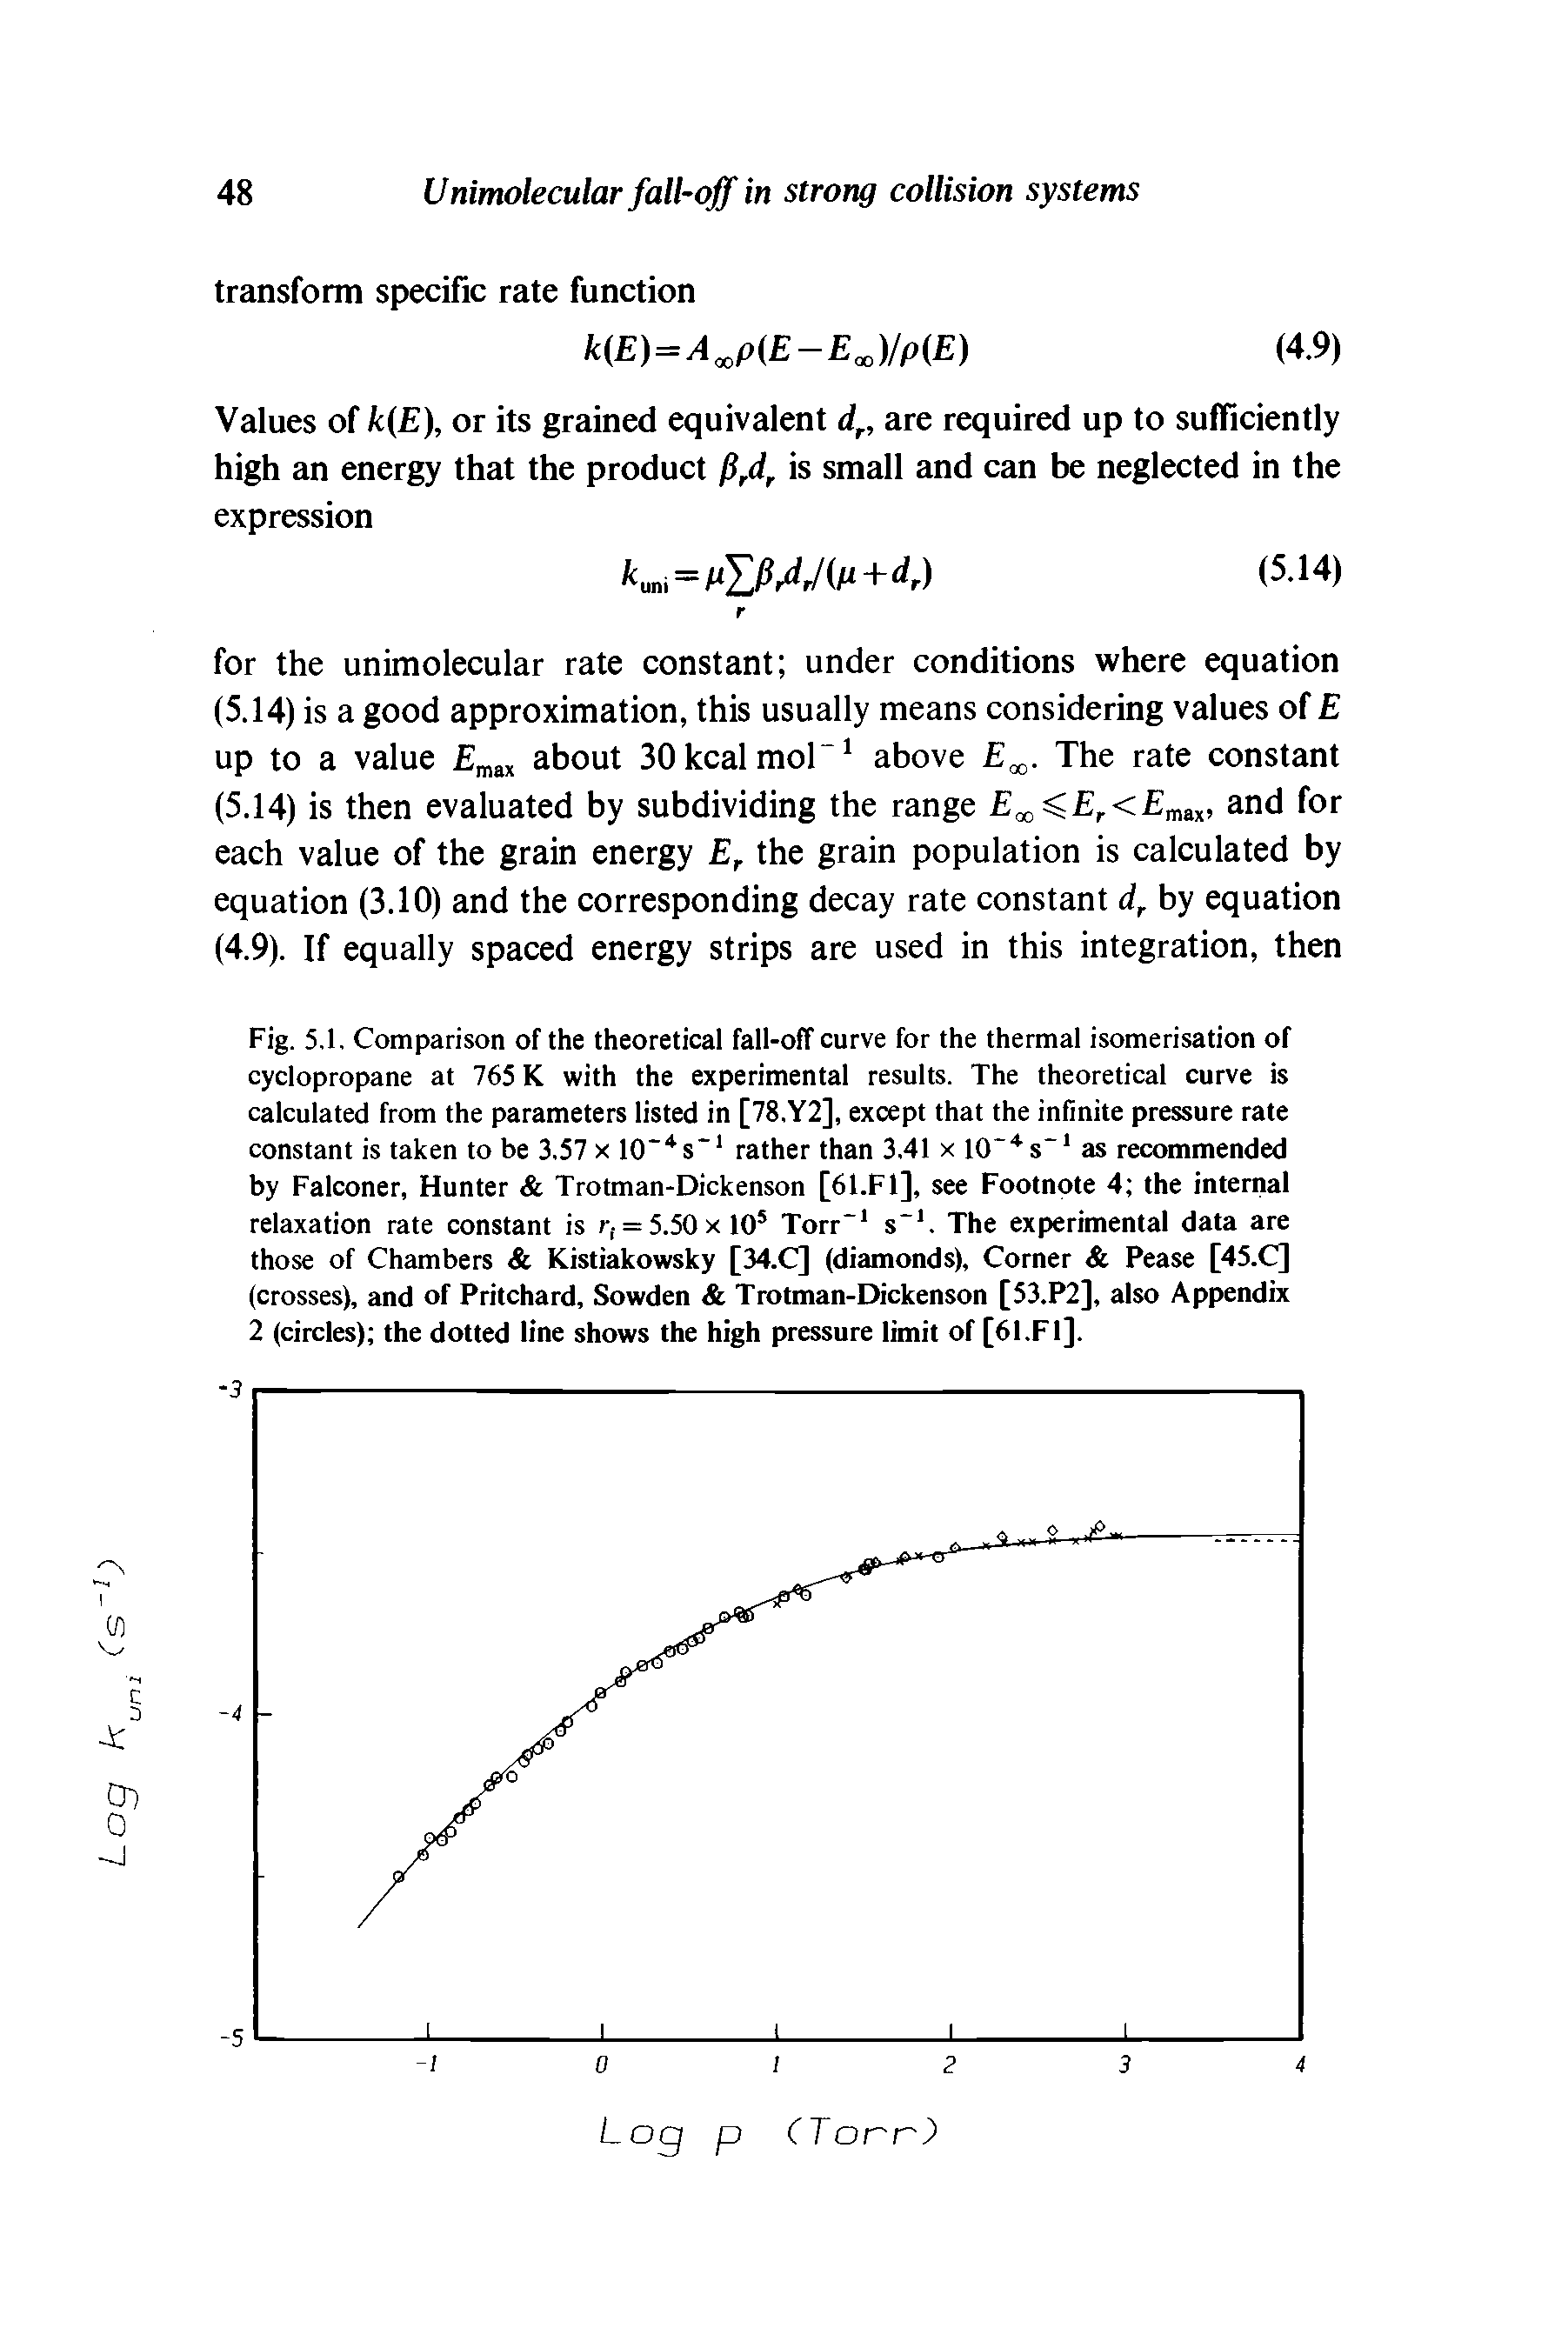 Fig. 5.1. Comparison of the theoretical fall-off curve for the thermal isomerisation of cyclopropane at 765 K with the experimental results. The theoretical curve is calculated from the parameters listed in [78.Y2], except that the infinite pressure rate constant is taken to be 3.57 x 10 s rather than 3.41 x lO s as recommended by Falconer, Hunter Trotman-Dickenson [61.F1], see Footnote 4 the internal relaxation rate constant is r, = 5.50x10 Torr s. The experimental data are those of Chambers Kistiakowsky [34.C] (diamonds). Corner Pease [45.C] (crosses), and of Pritchard, Sowden Trotman-Dickenson [53.P2], also Appendix 2 (circles) the dotted line shows the high pressure limit of [61.F1],...